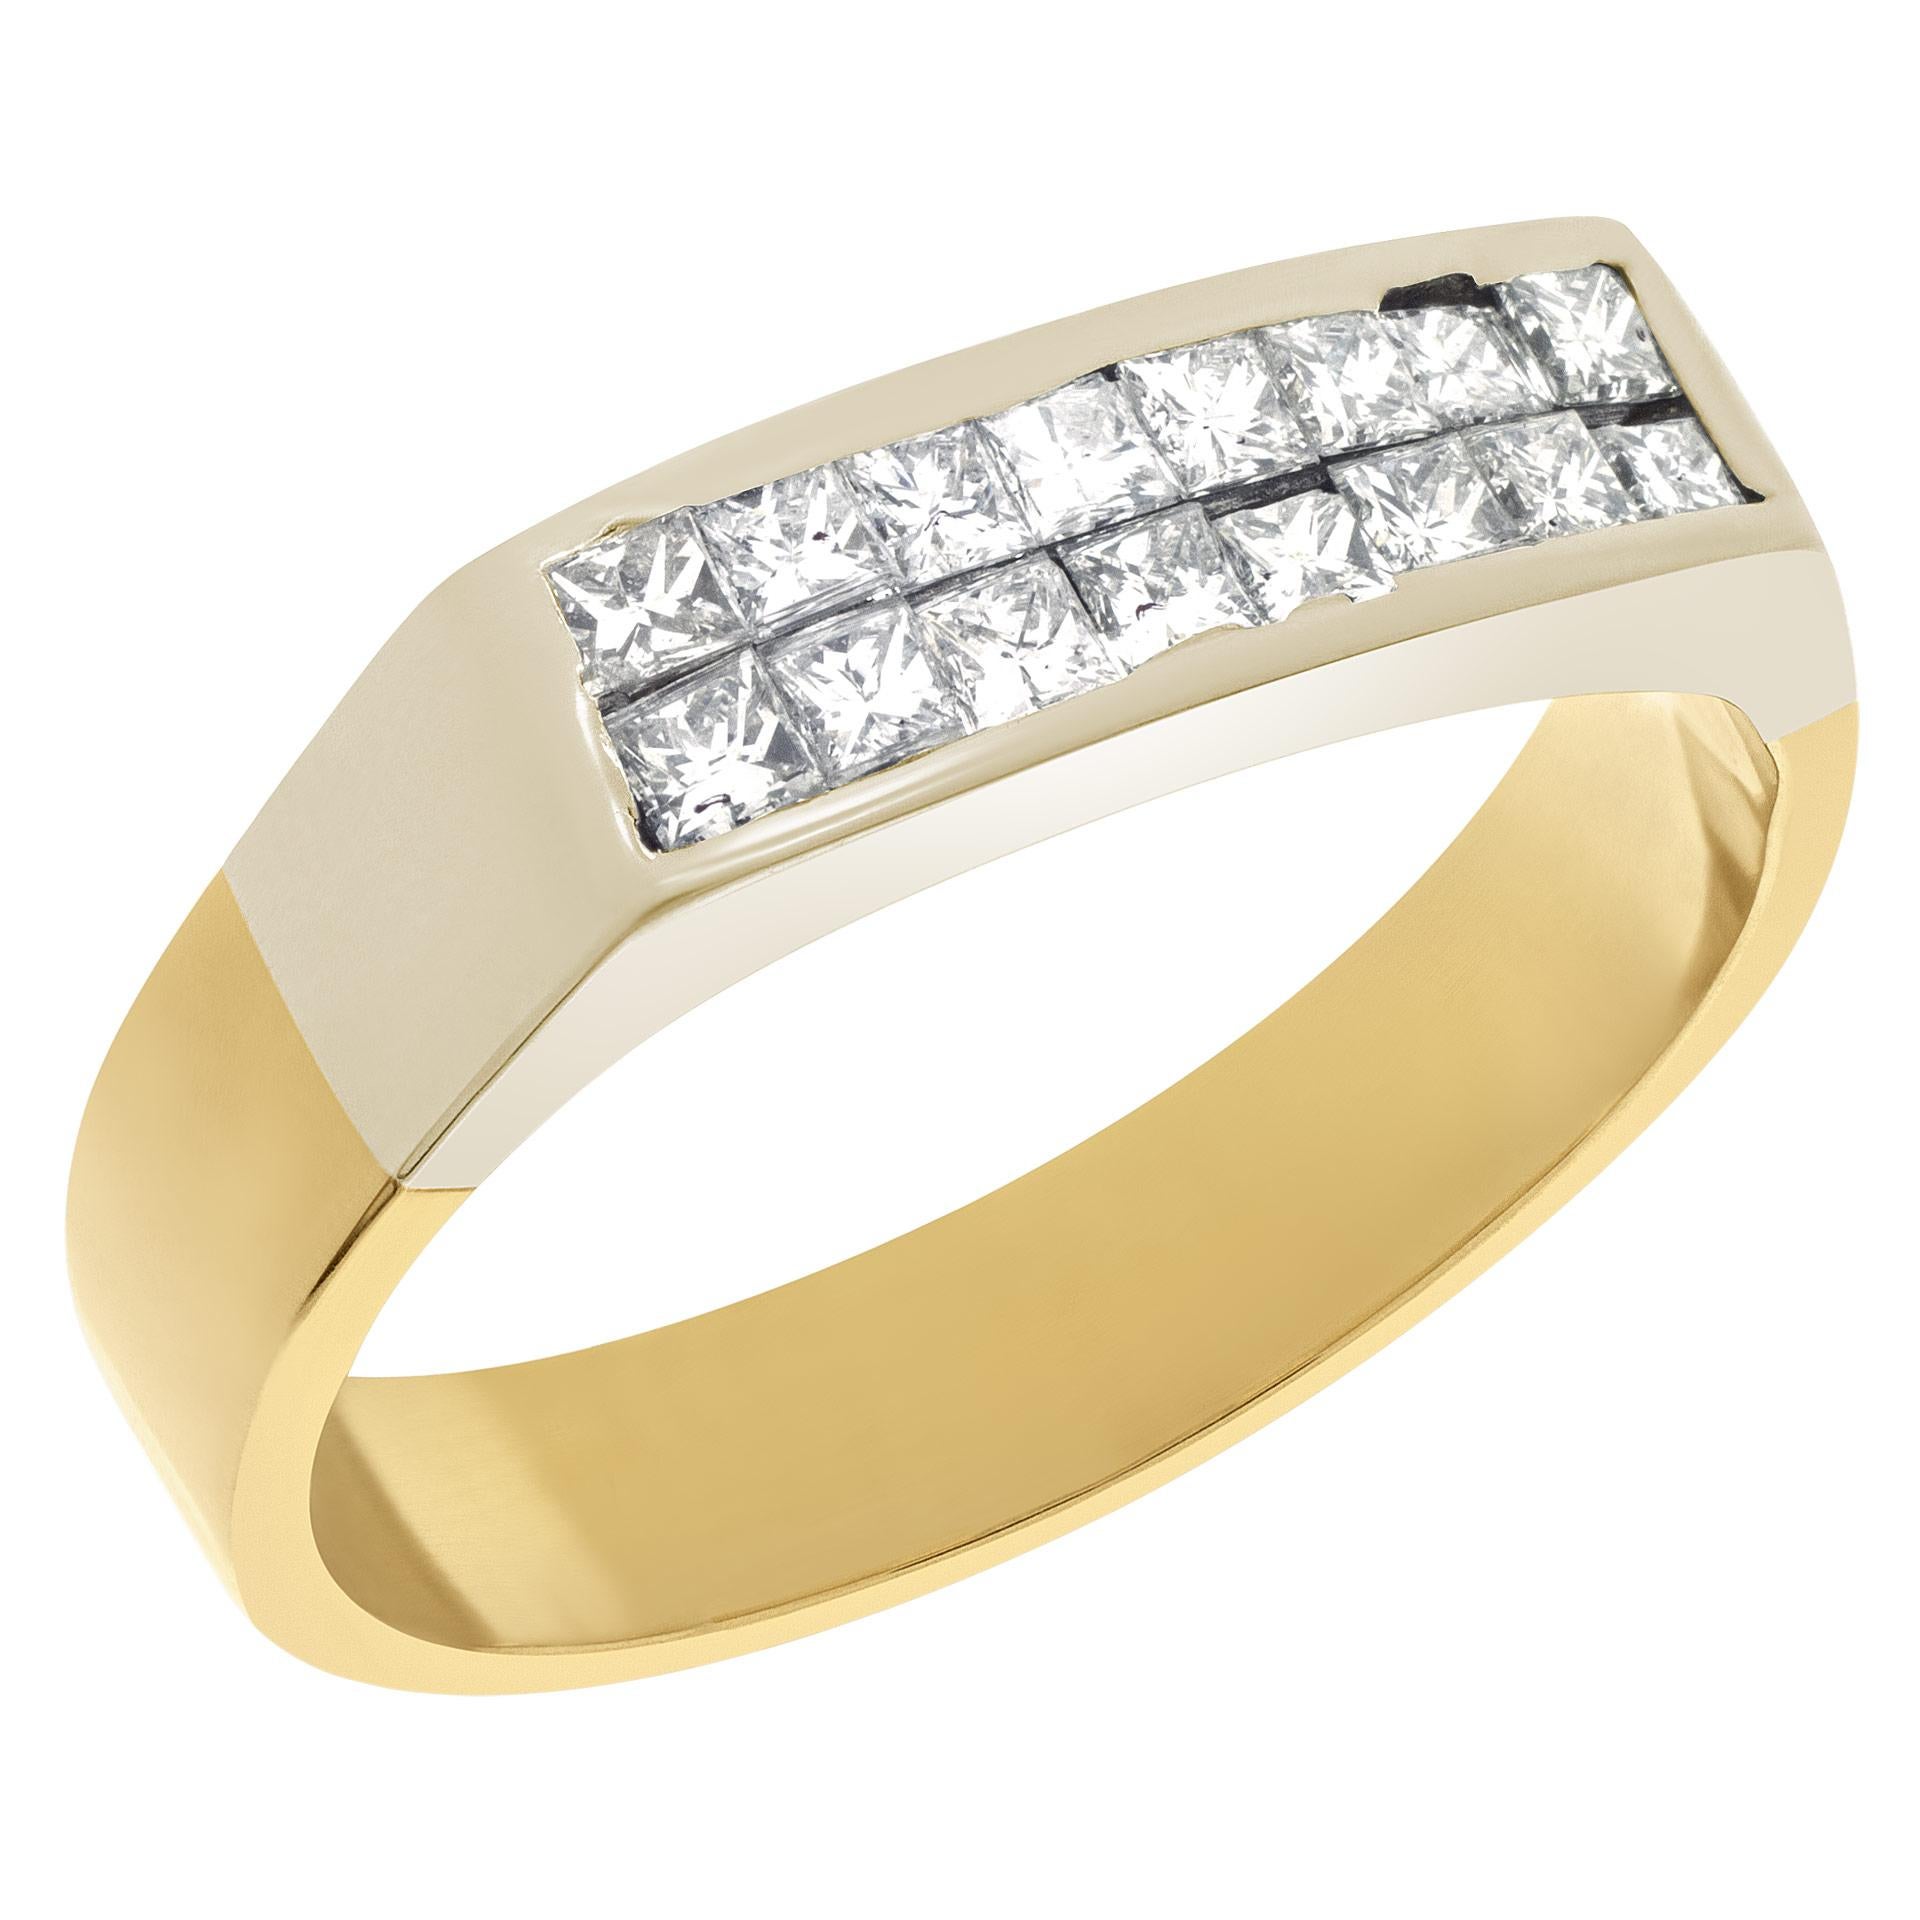 Eye catching mens diamond ring in 14k yellow gold with 0.64 cts in invisible set princess cut diamonds. Size 10. Band width is 5mm on top and 4mm on the bottom.  This Diamond ring is currently size 10 and some items can be sized up or down, please